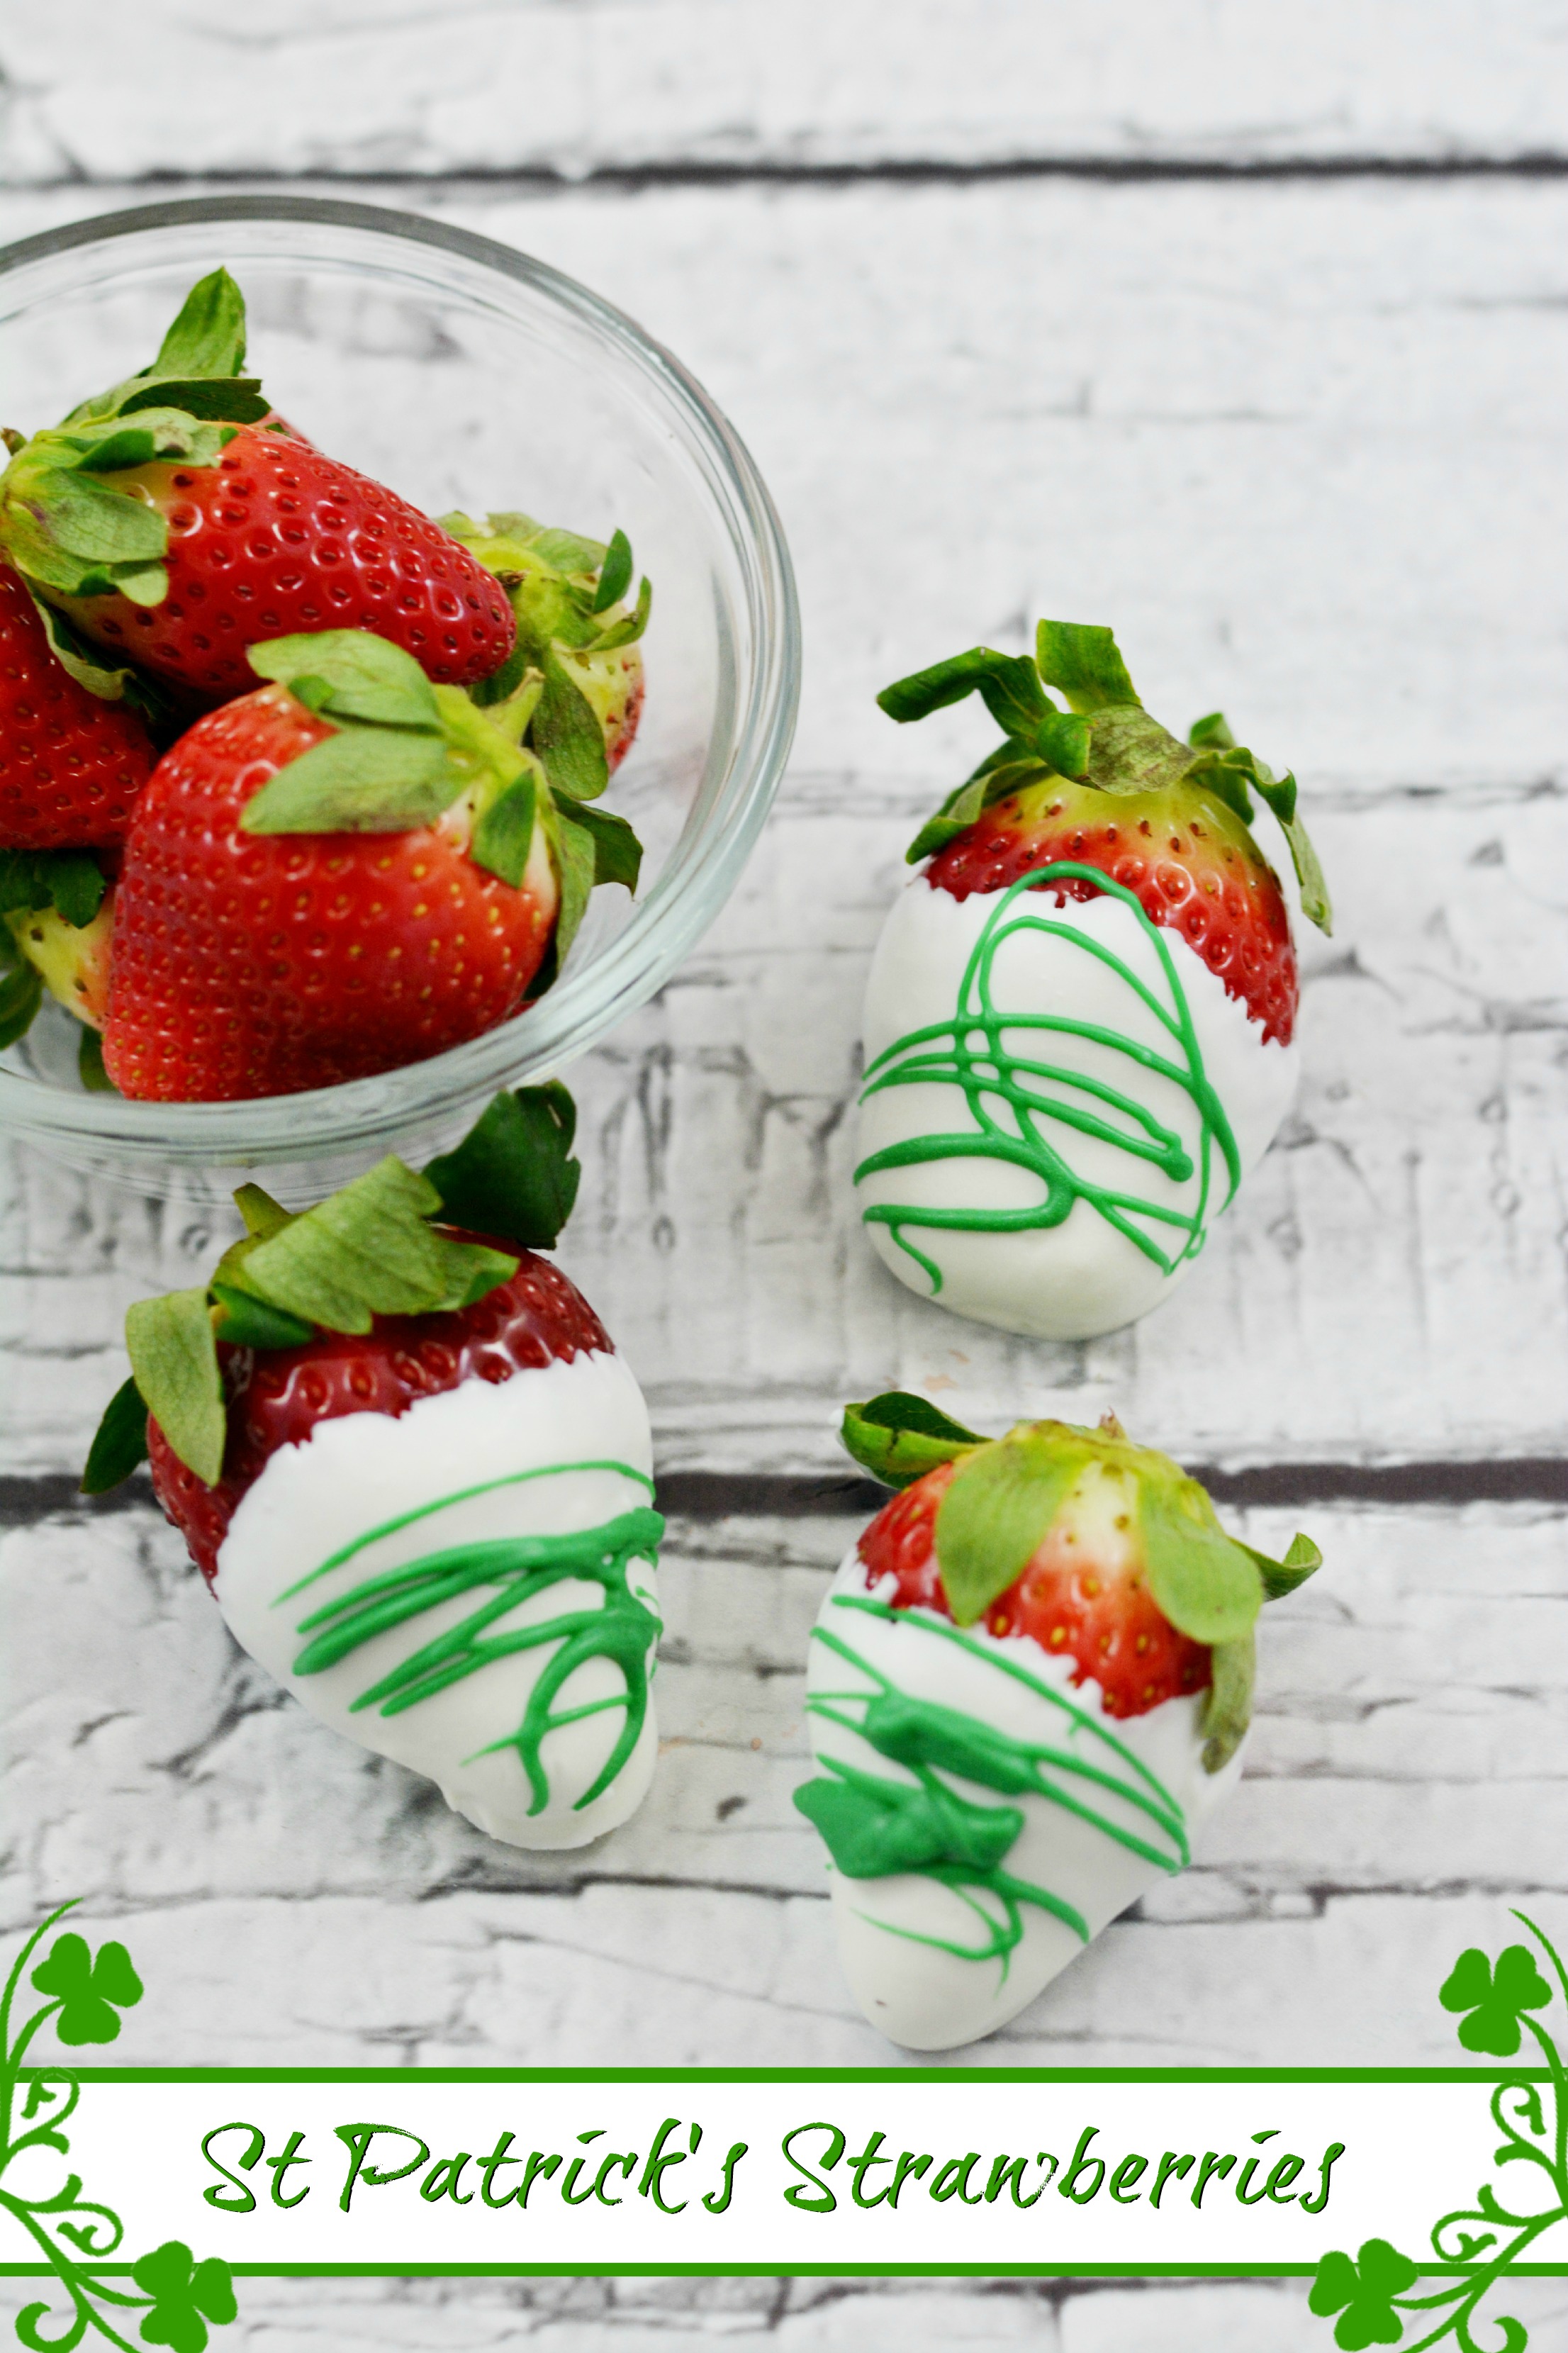 Dipped Strawberries for St Patricks Day #StPatricksDay #partyfood at thatbaldchick.com